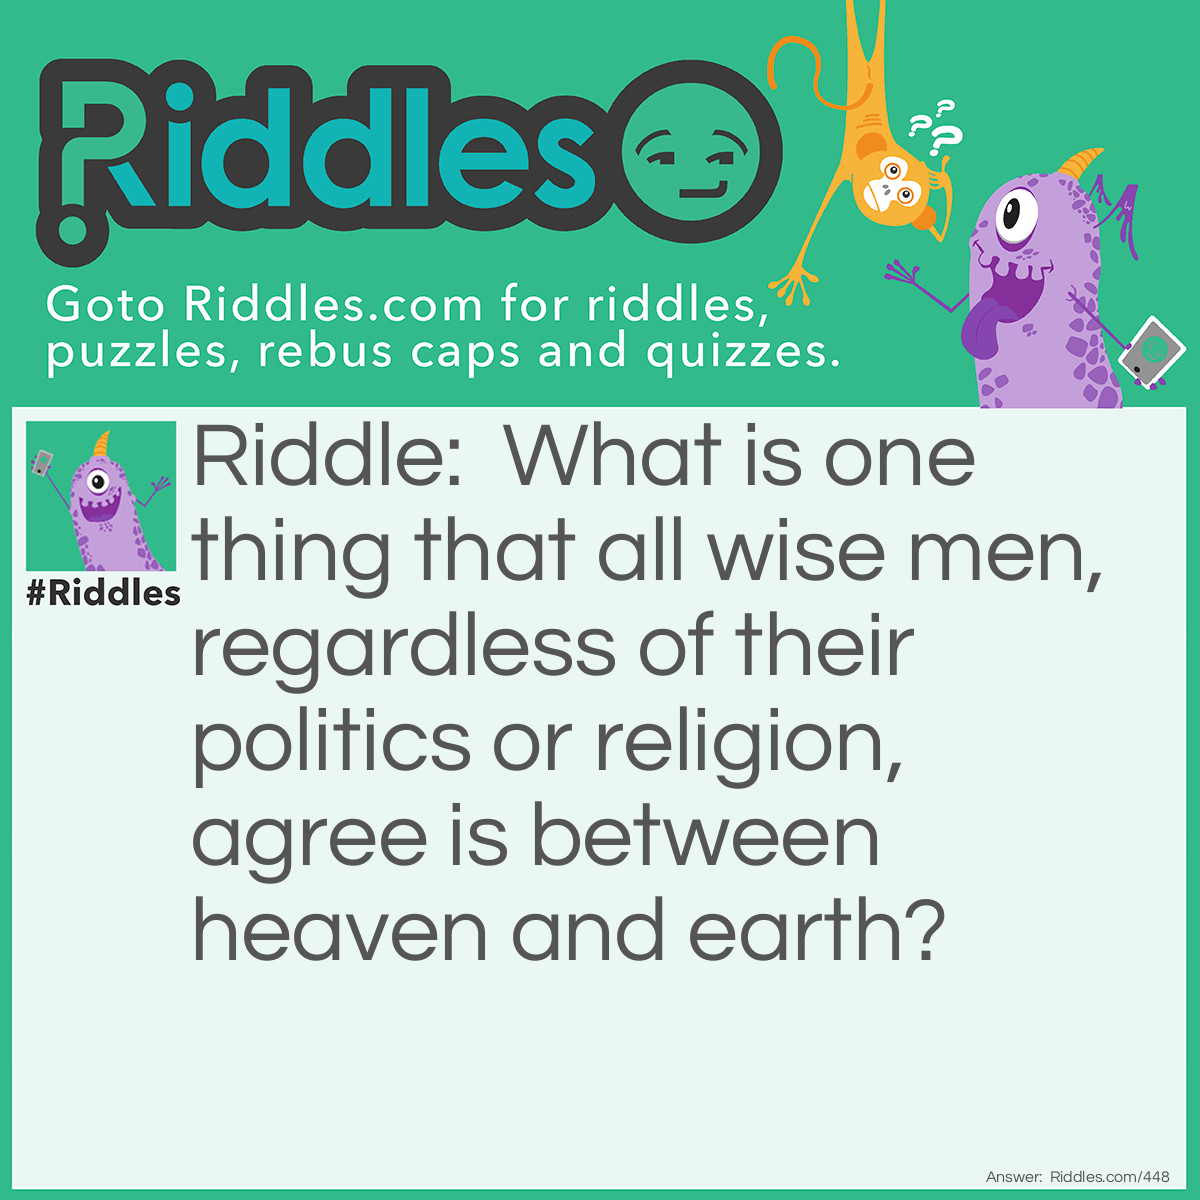 Riddle: What is one thing that all wise men, regardless of their politics or religion, agree is between heaven and earth? Answer: The word 'And'.